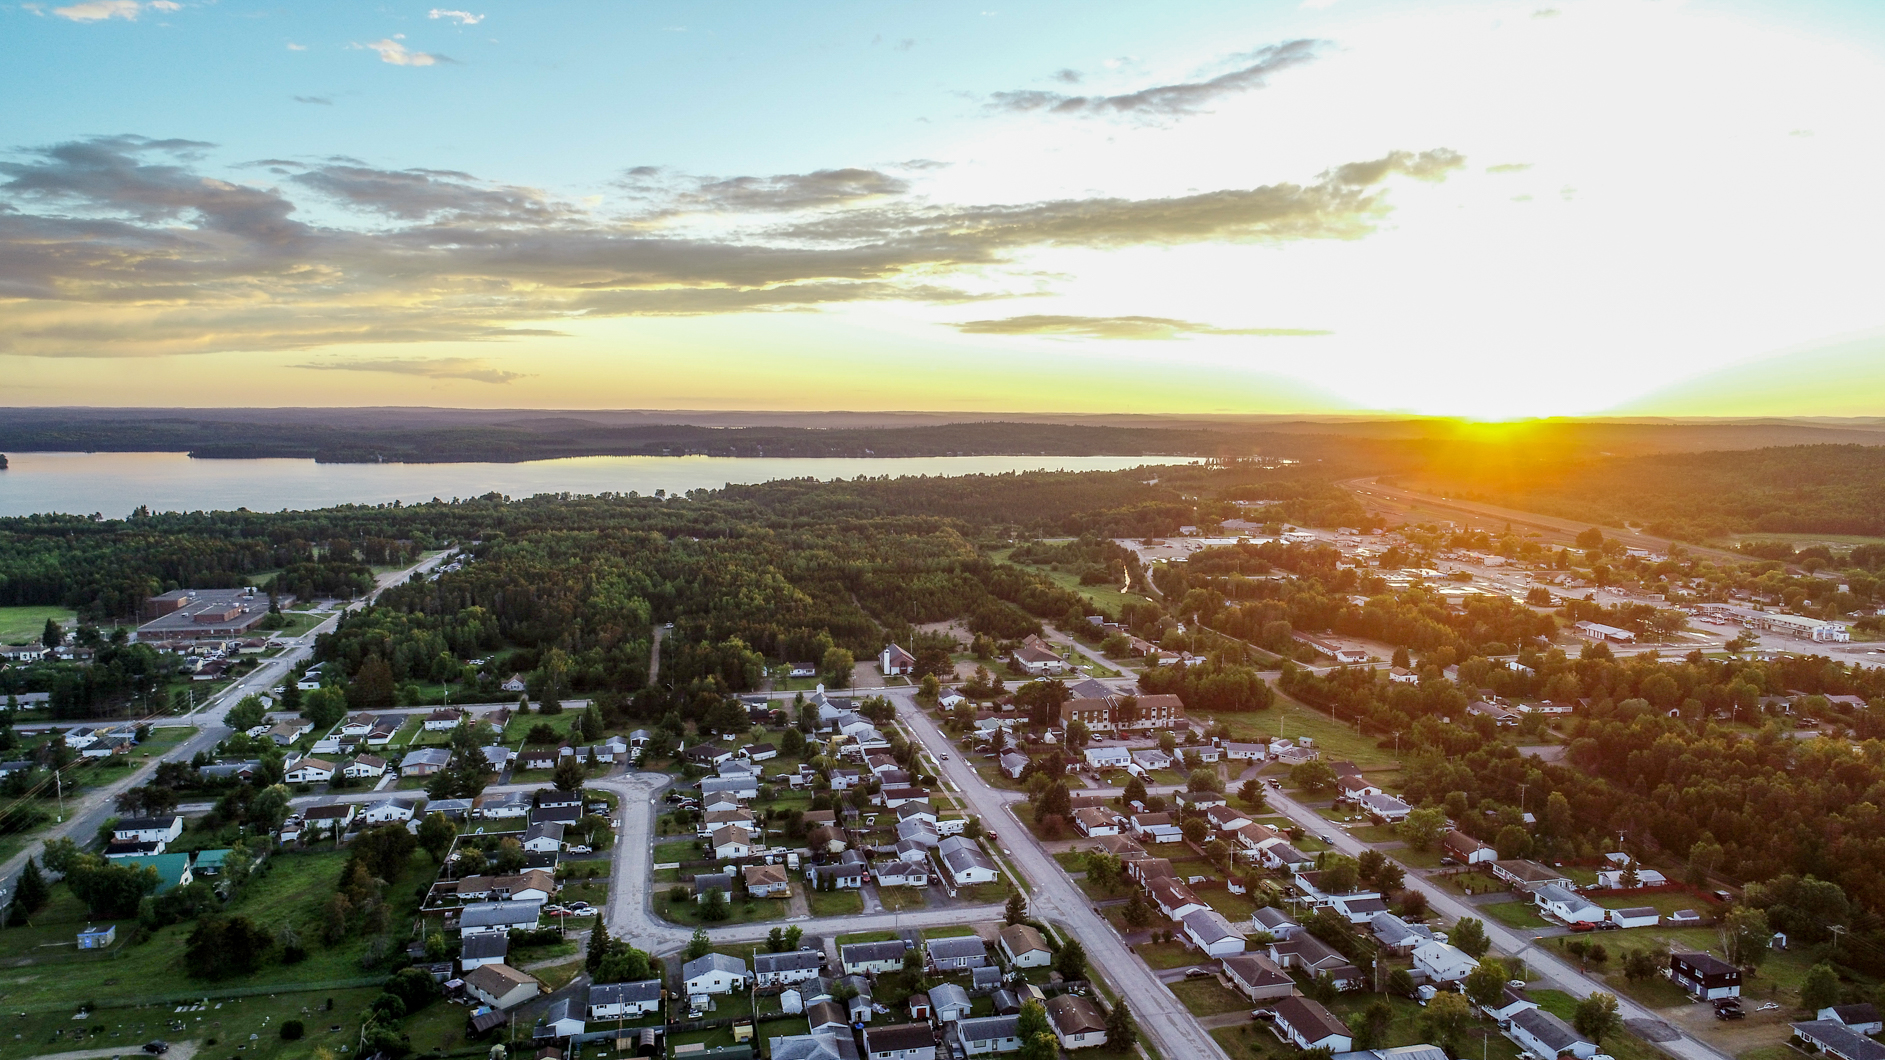 An aerial photo of the community of Ignace, with a golden sun on the horizon.